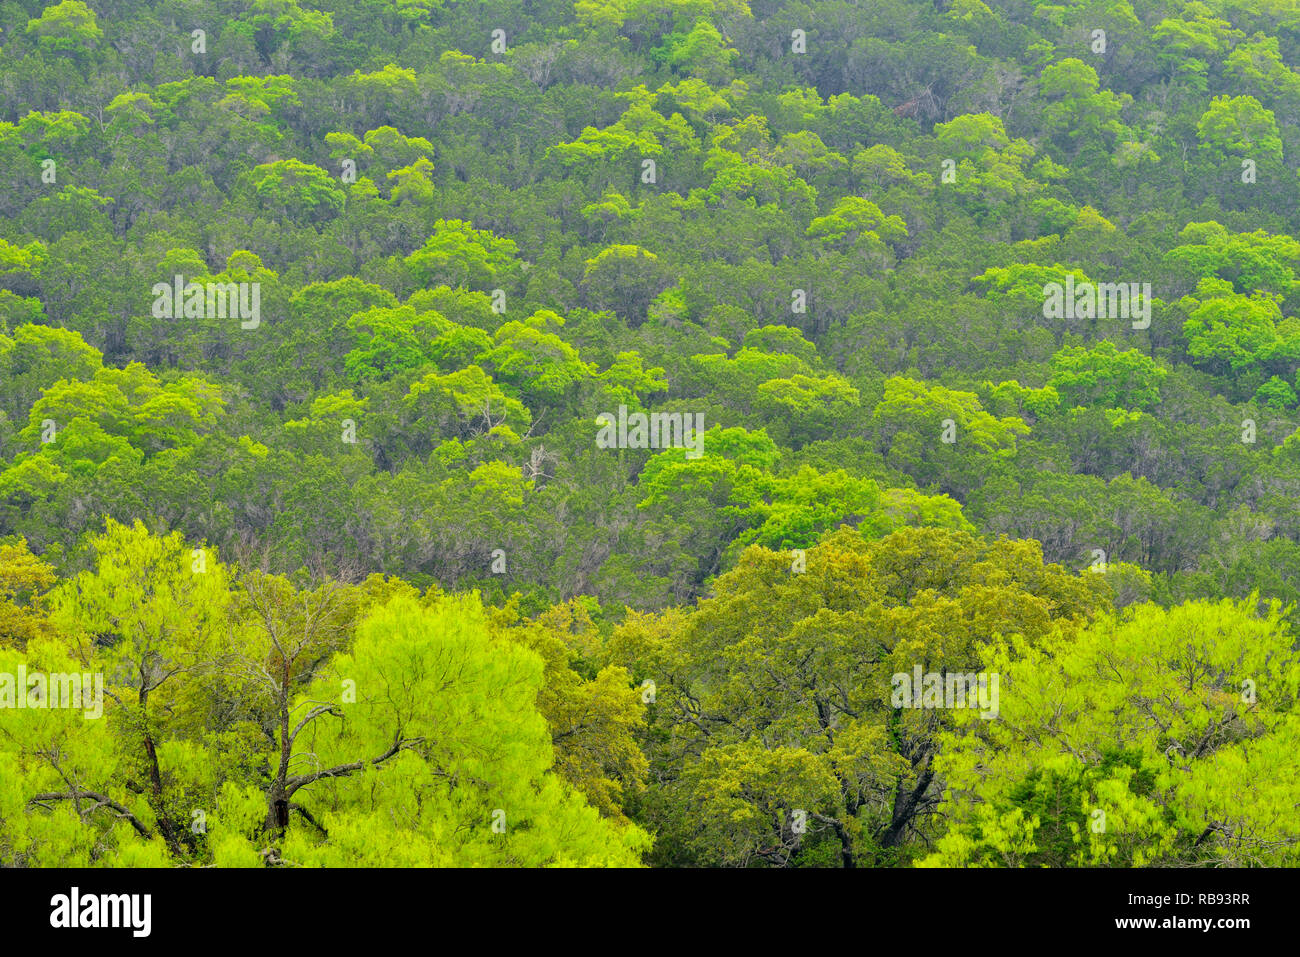 Spring foliage on a hillside in the Cow Creek Valley, Balconies Canyonlands National Wildlife Refuge, Texas, USA Stock Photo